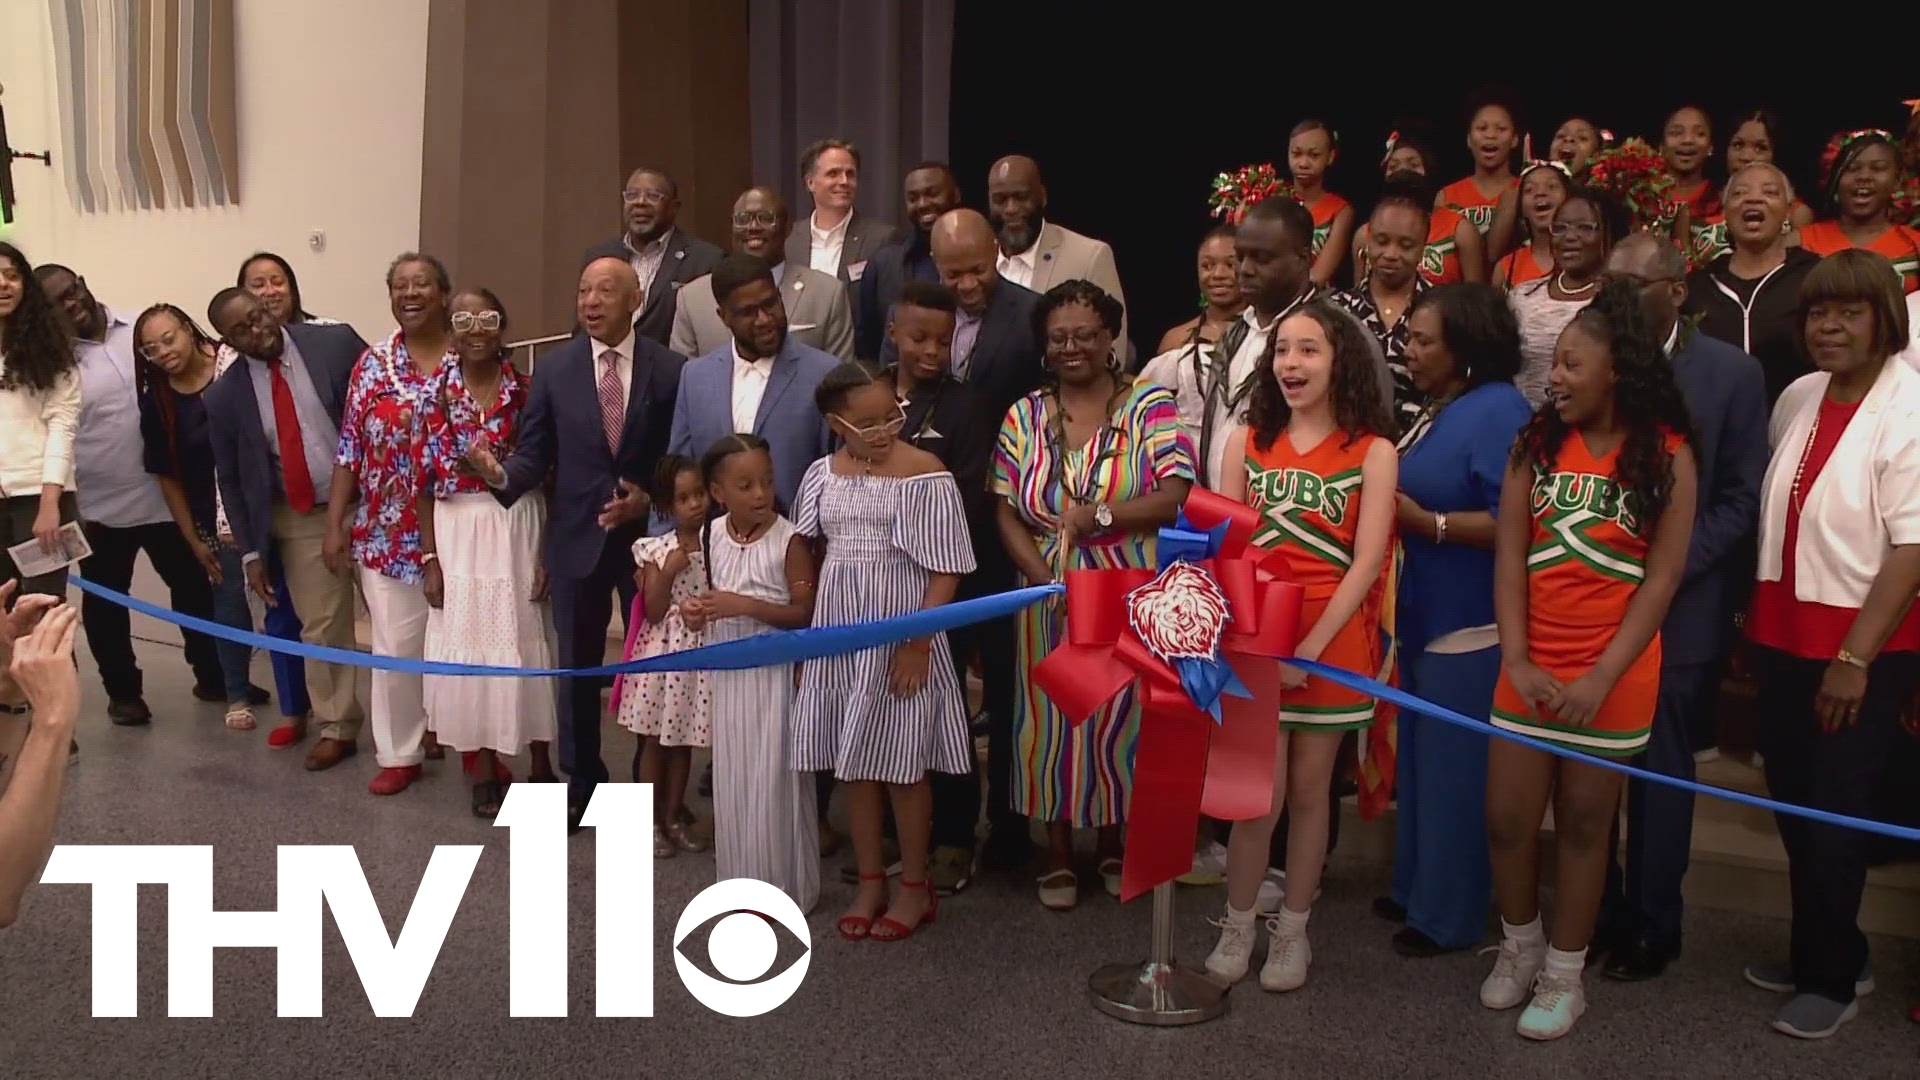 Little Rock School District held a ribbon cutting on Thursday, celebrating the grand opening of its new Dr. Marion G. Lacey K-8 School.